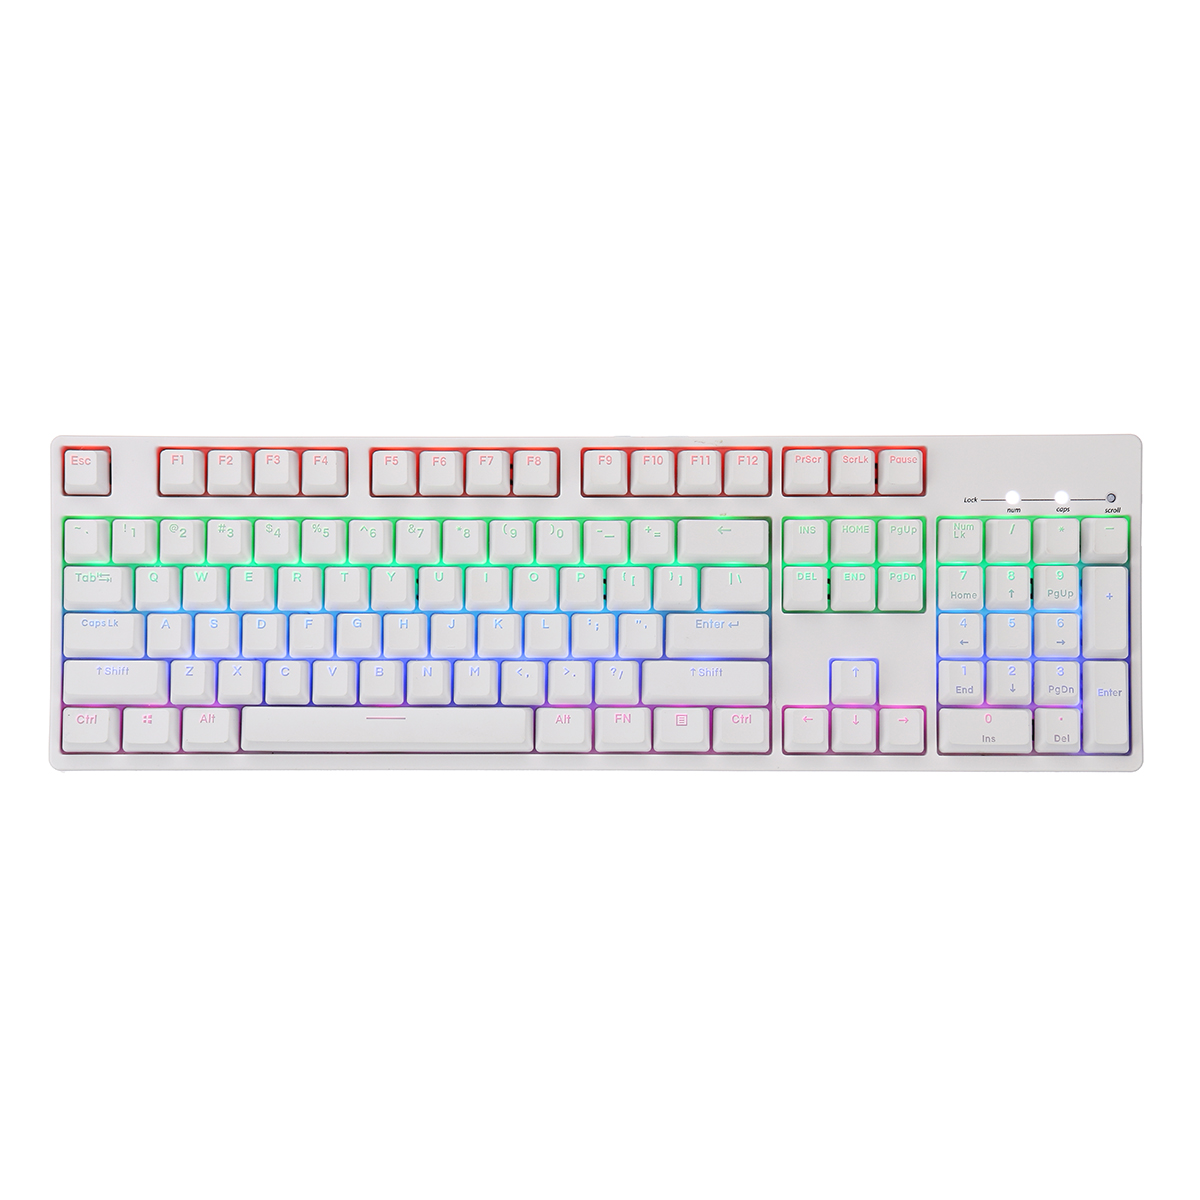 

104 Key NKRO USB Wired RGB Backlit Gateron Switch PBT Double Shot Keycaps Mechanical Gaming Keyboard for E-sport office PC Laptop